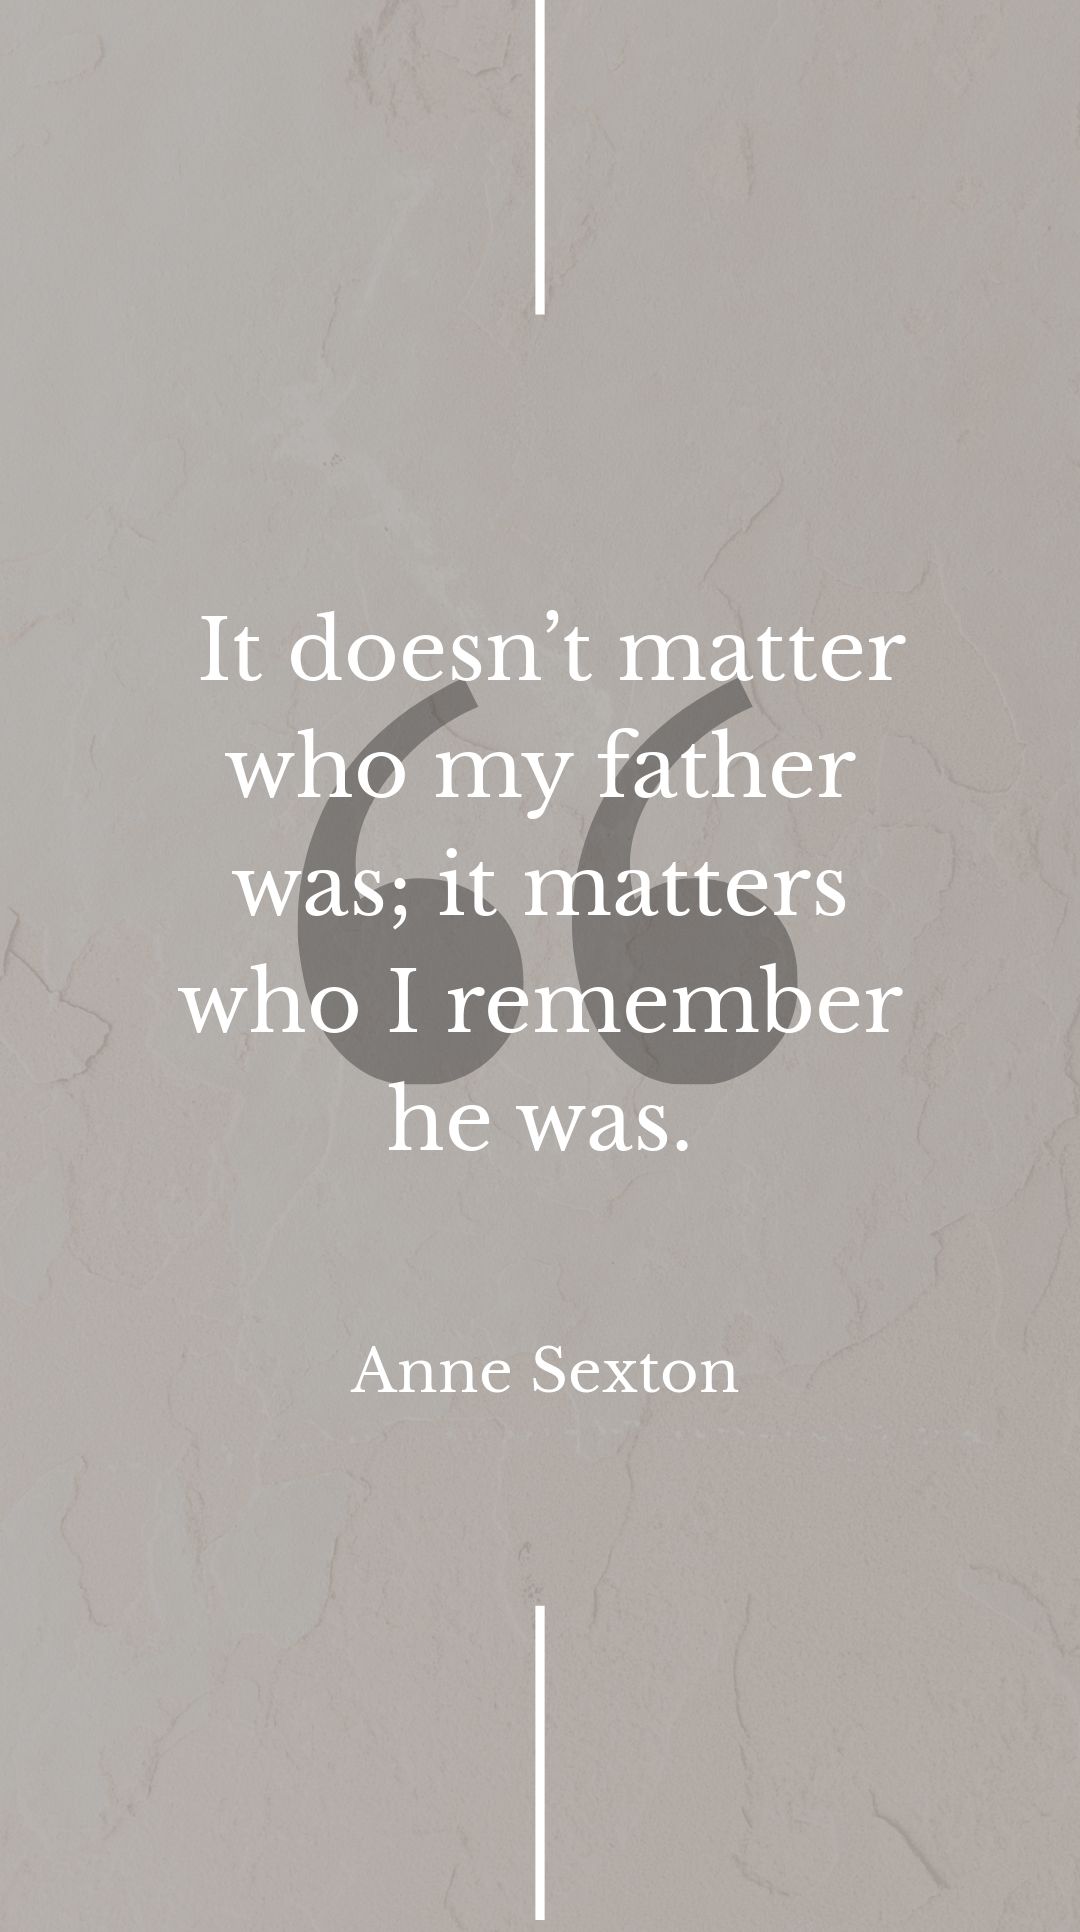 Free Anne Sexton - It doesn’t matter who my father was; it matters who I remember he was. in JPG